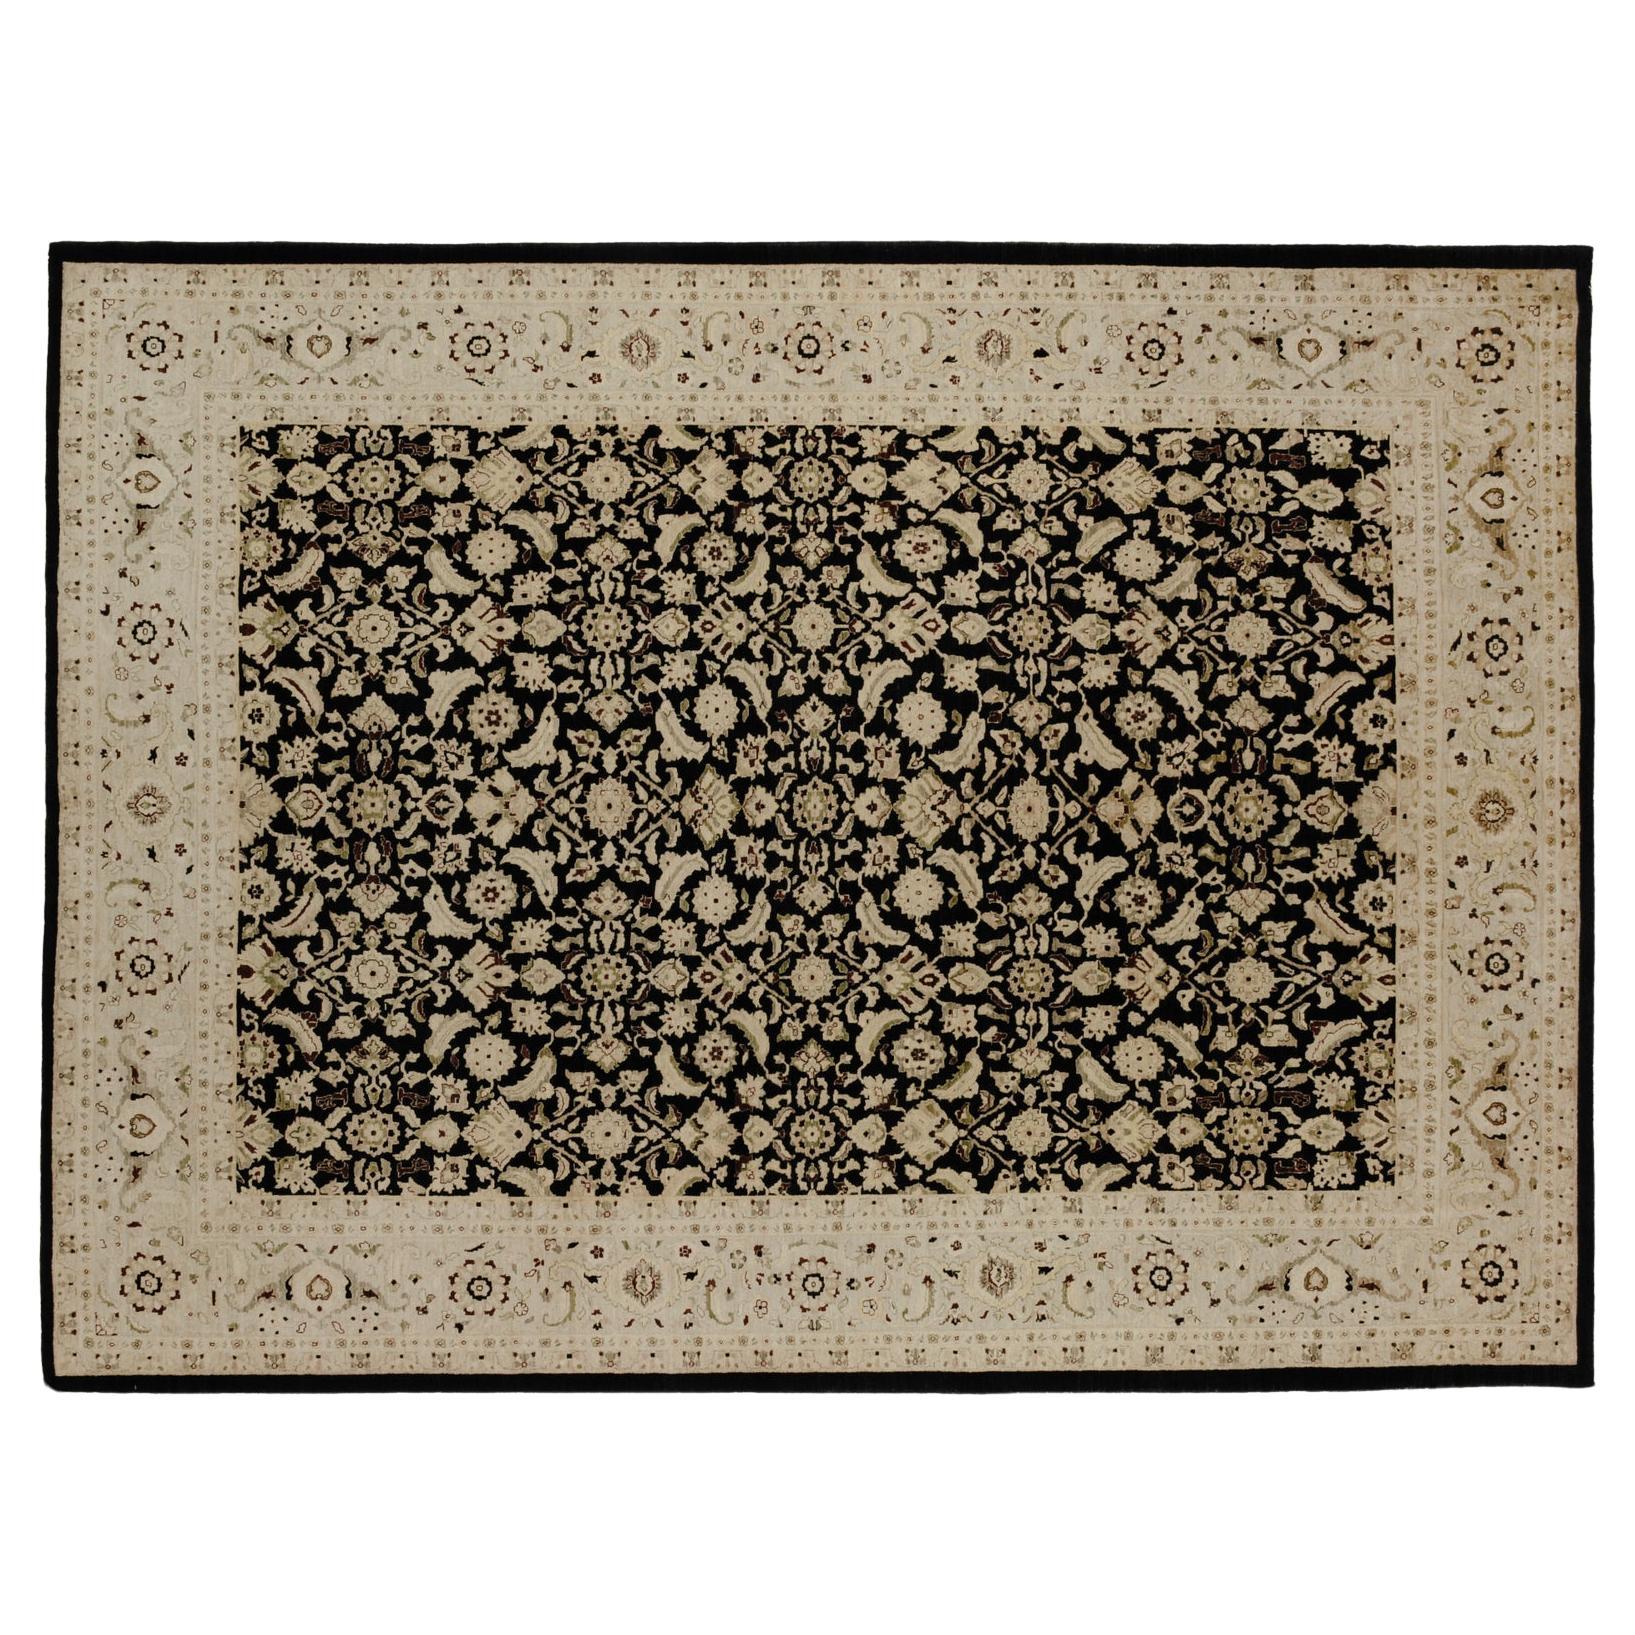 Black and Gold Intricate Floral Design Rug in 9'x12' For Sale